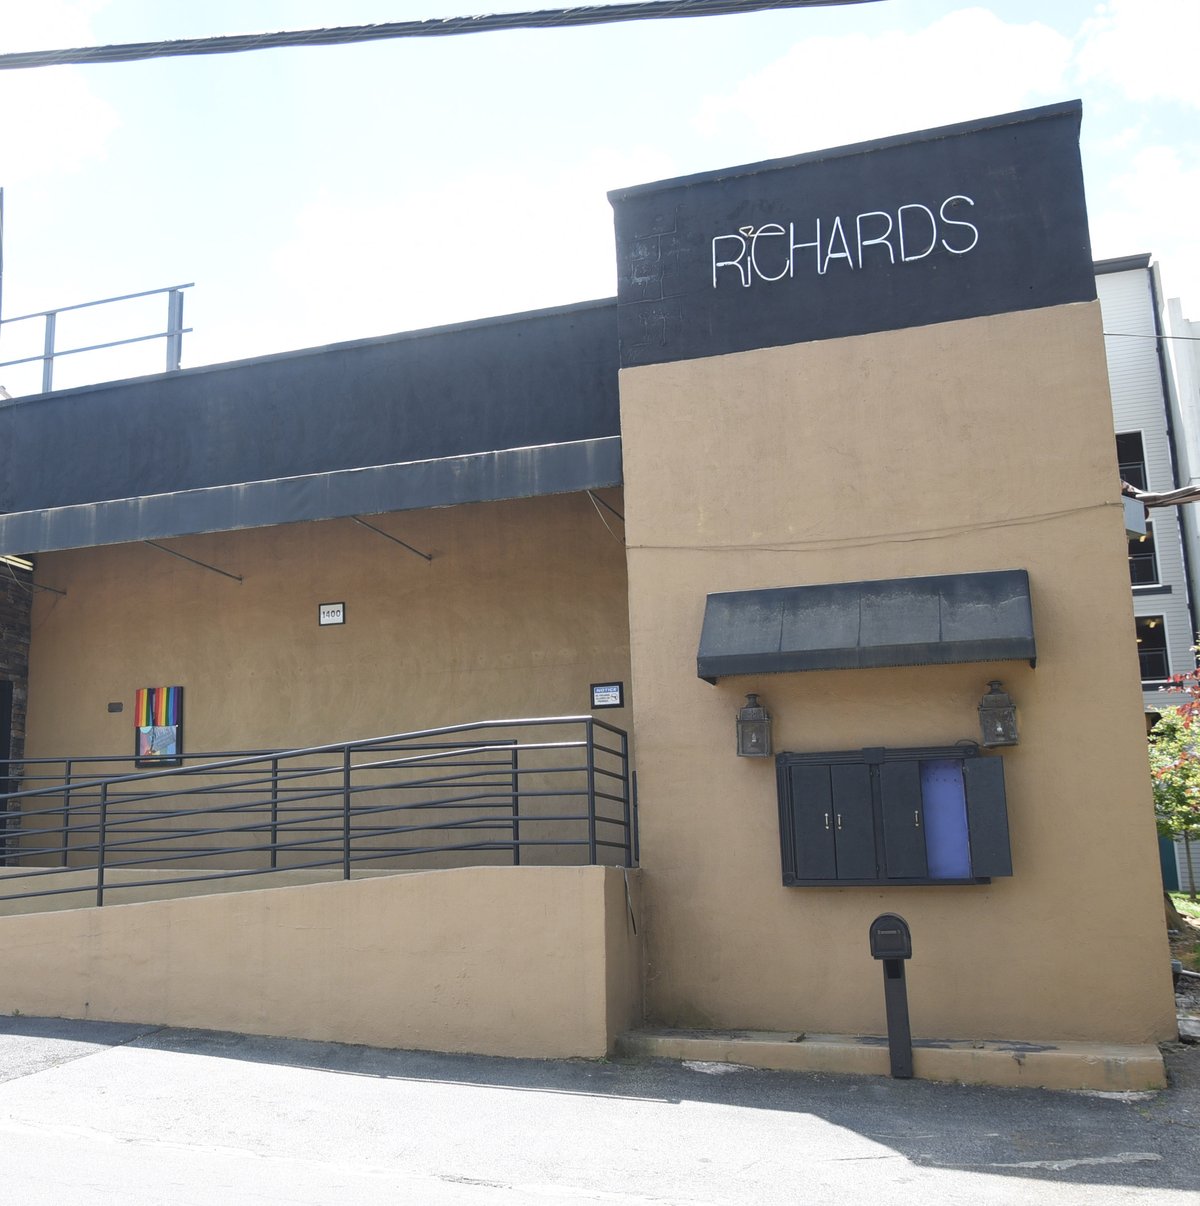 Popular Atlanta gay club Swinging Richards files for Chapter 11 bankruptcy protection